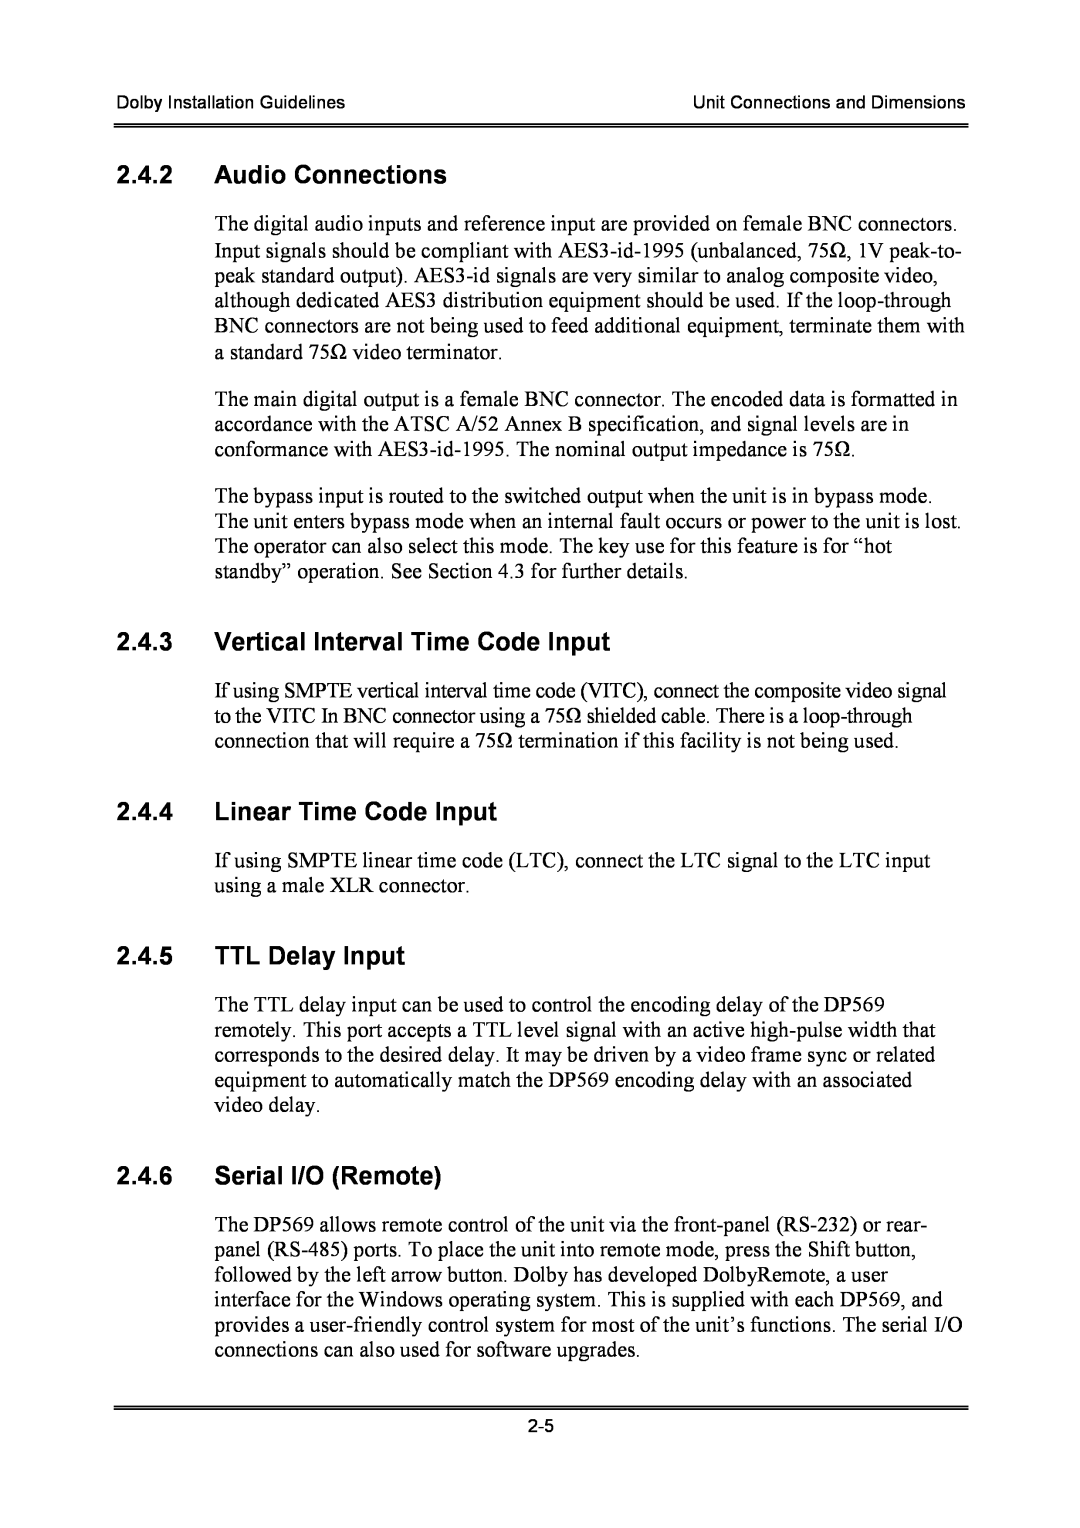 Dolby Laboratories S01/13621 2.4.2Audio Connections, 2.4.3Vertical Interval Time Code Input, 2.4.4Linear Time Code Input 